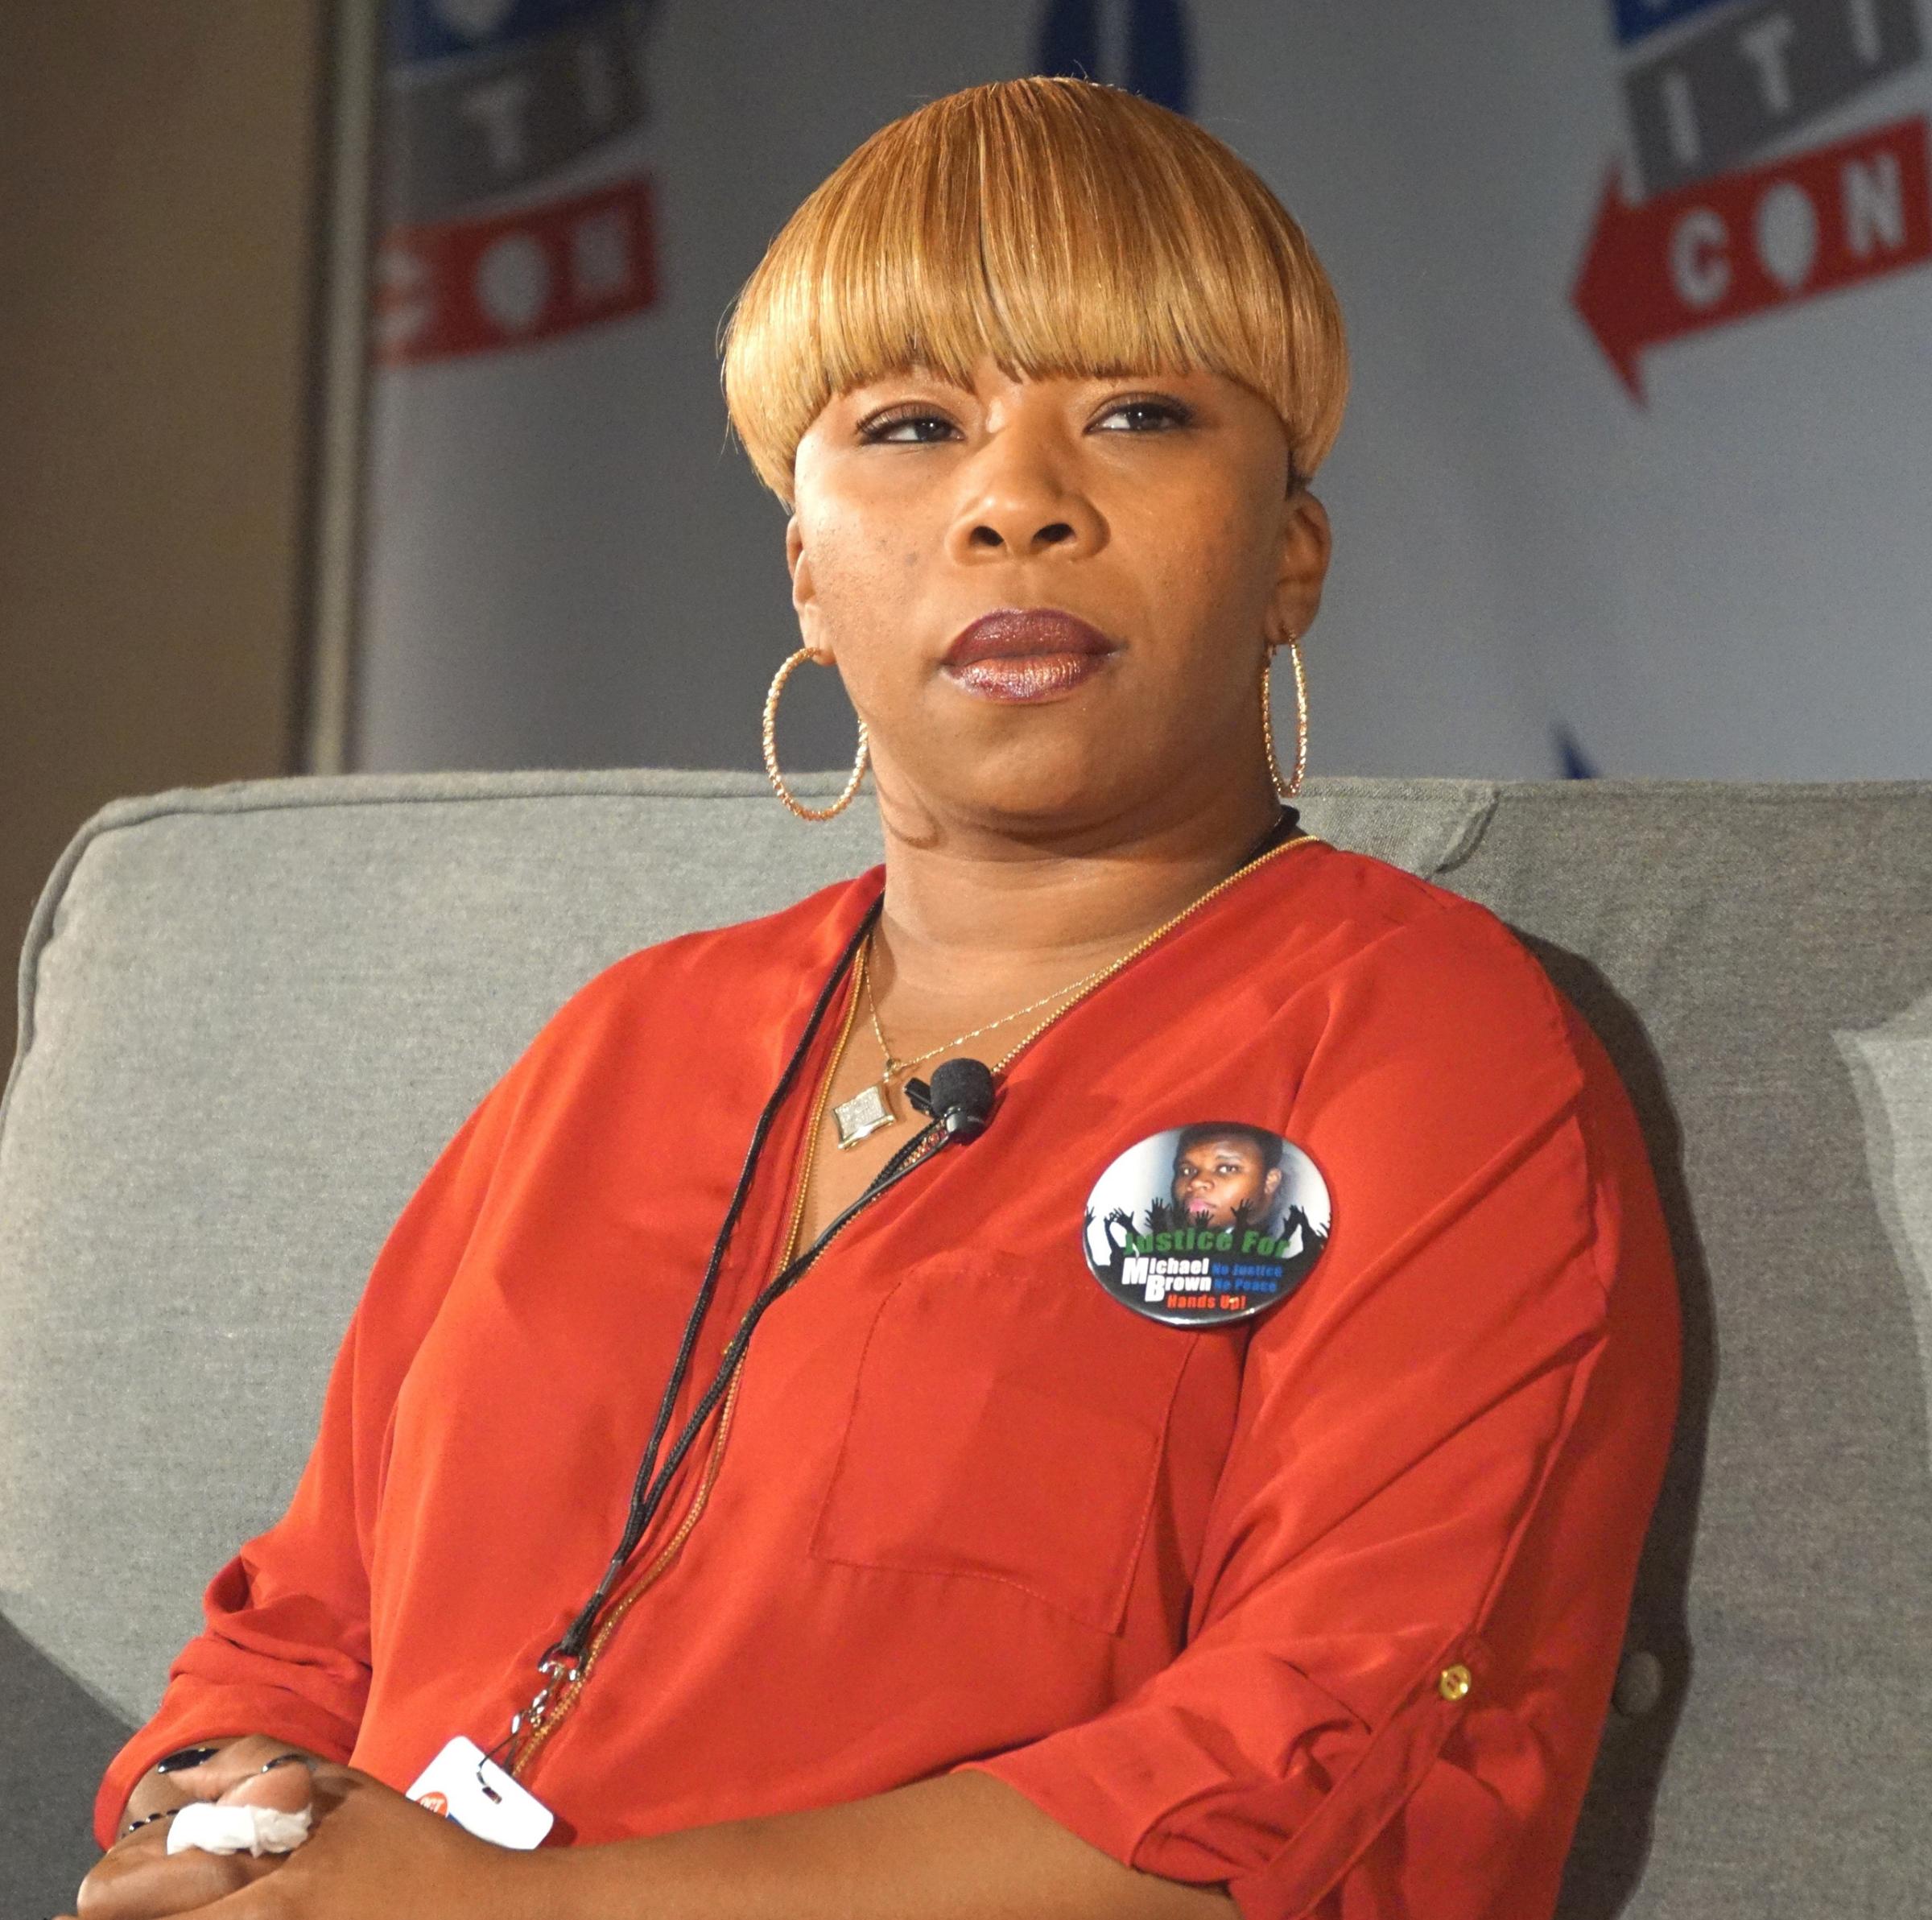 Lesley McSpadden, mother of slain 18-year old Michael Brown Jr, is seen during a panel at Politicon at the Los Angeles Convention Center on Oct. 10, 2015.